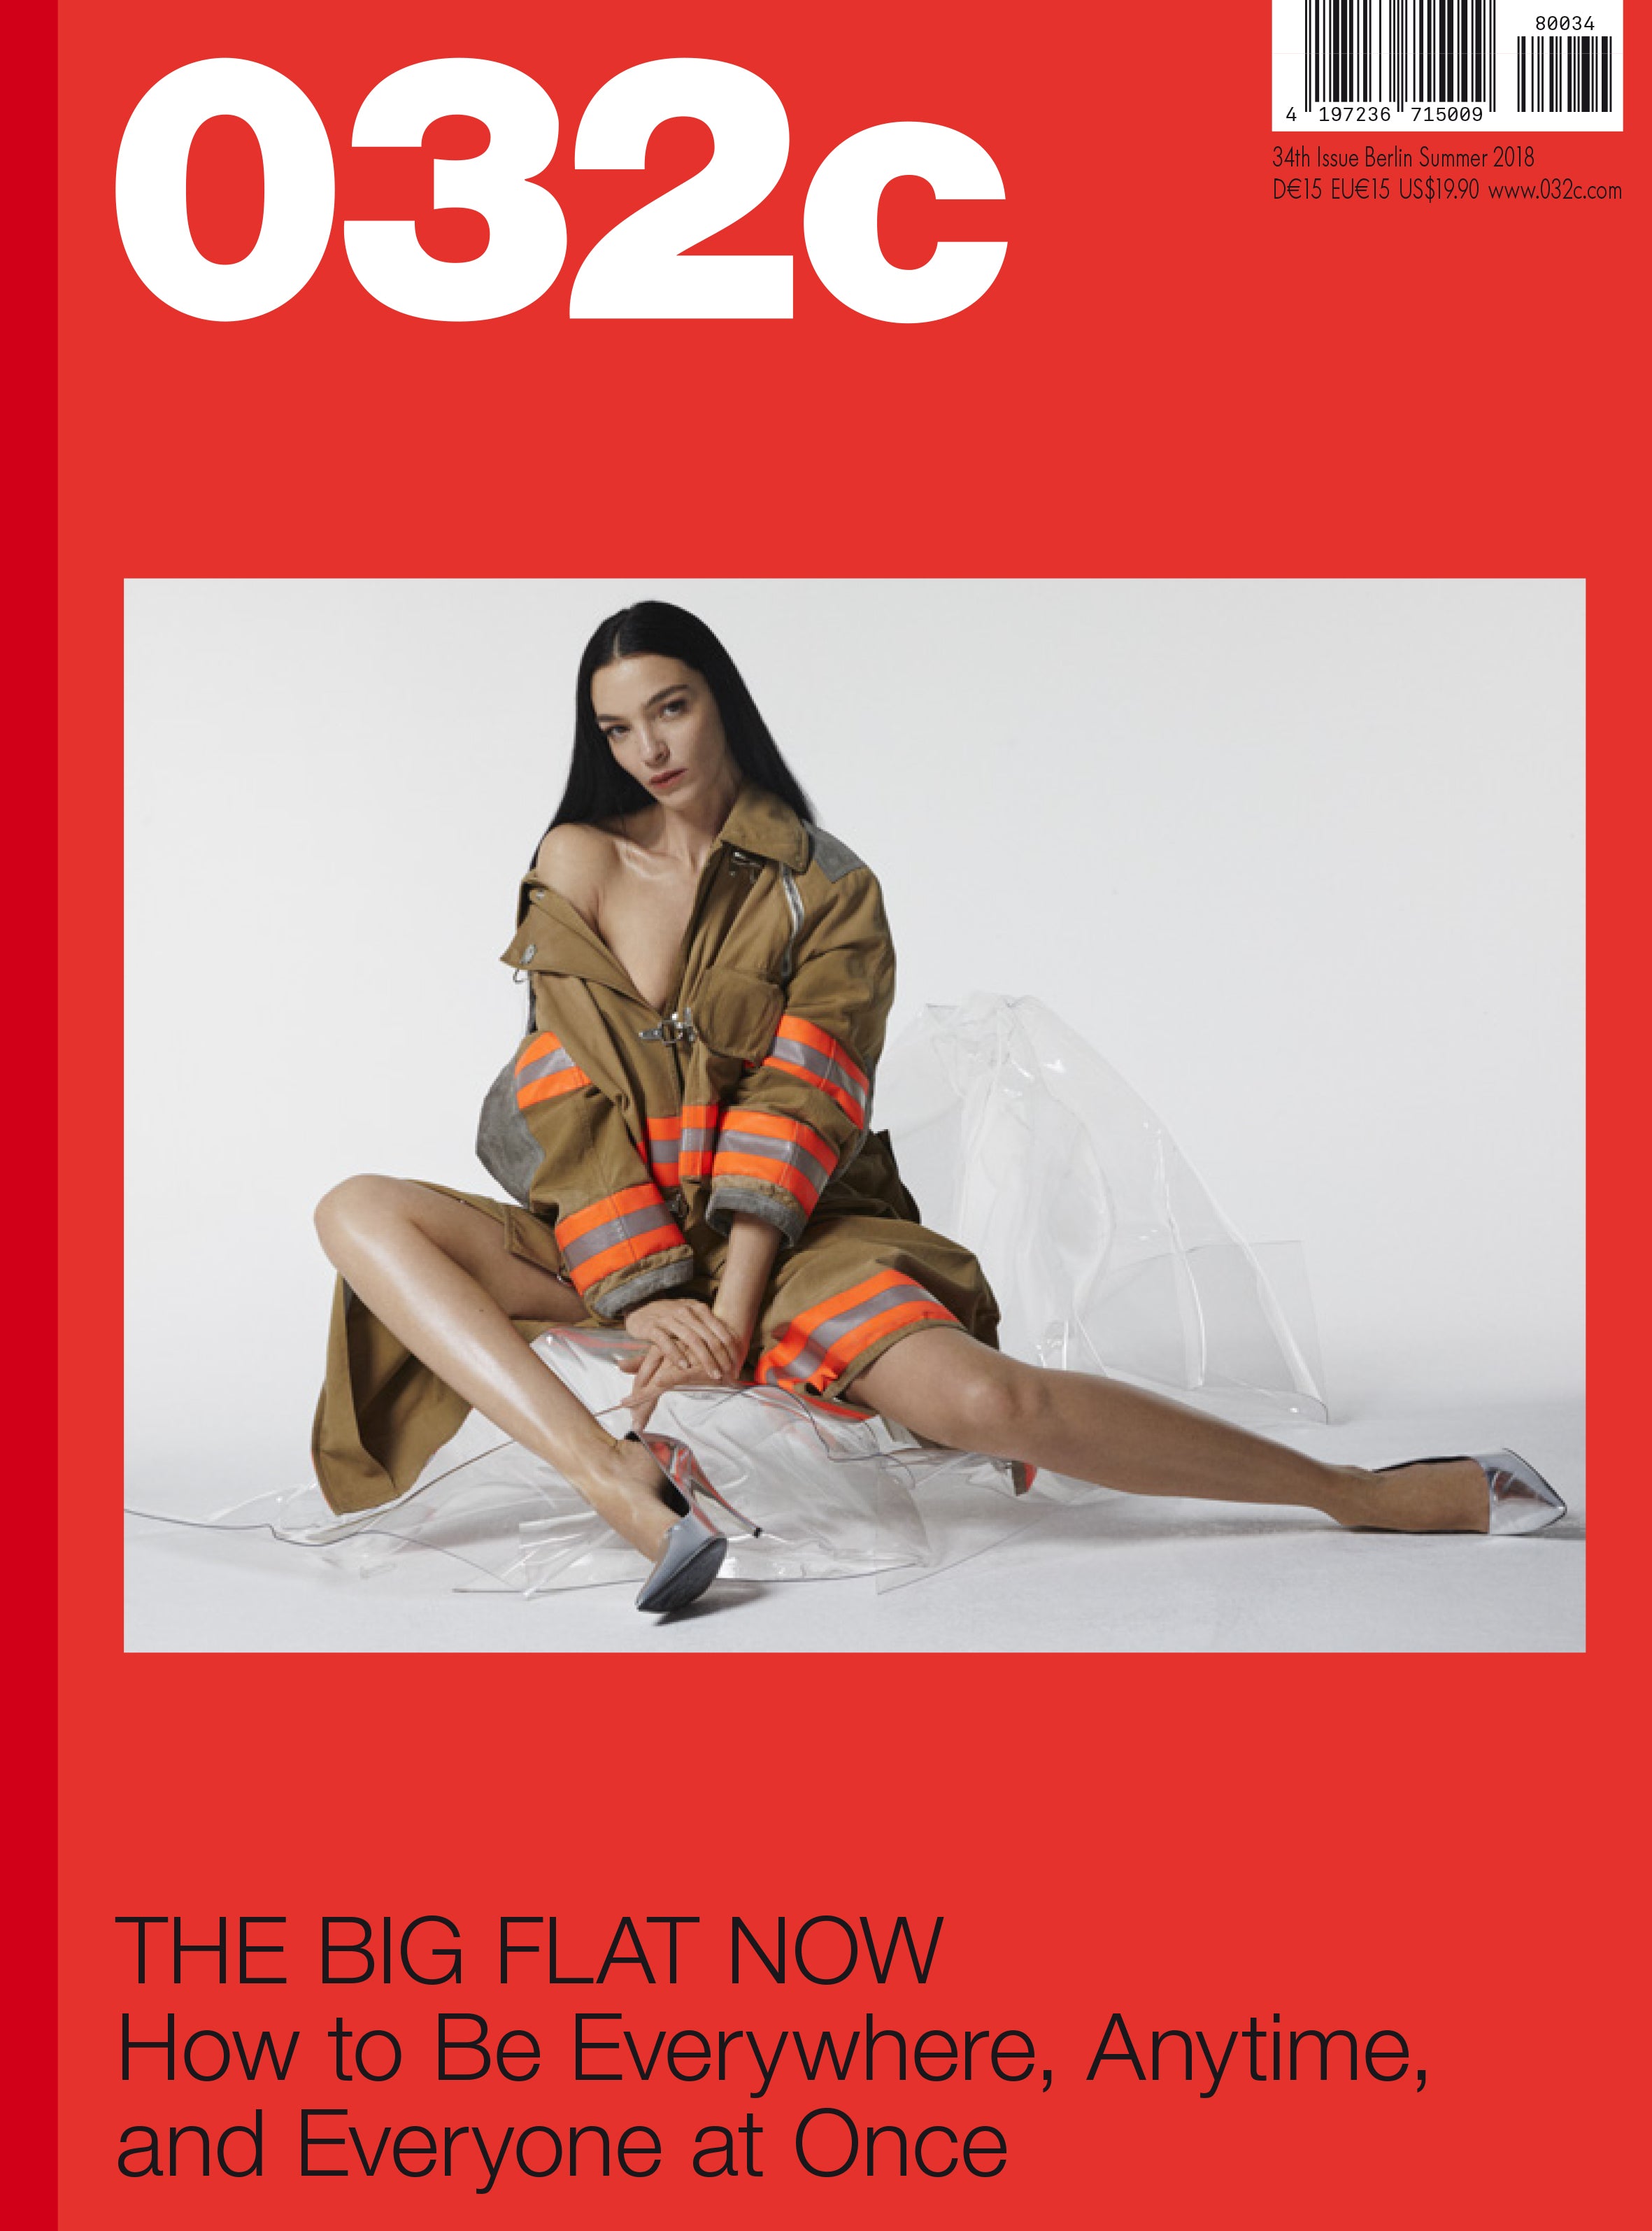 Issue 34 Summer 18 The Big Flat Now 032c Store